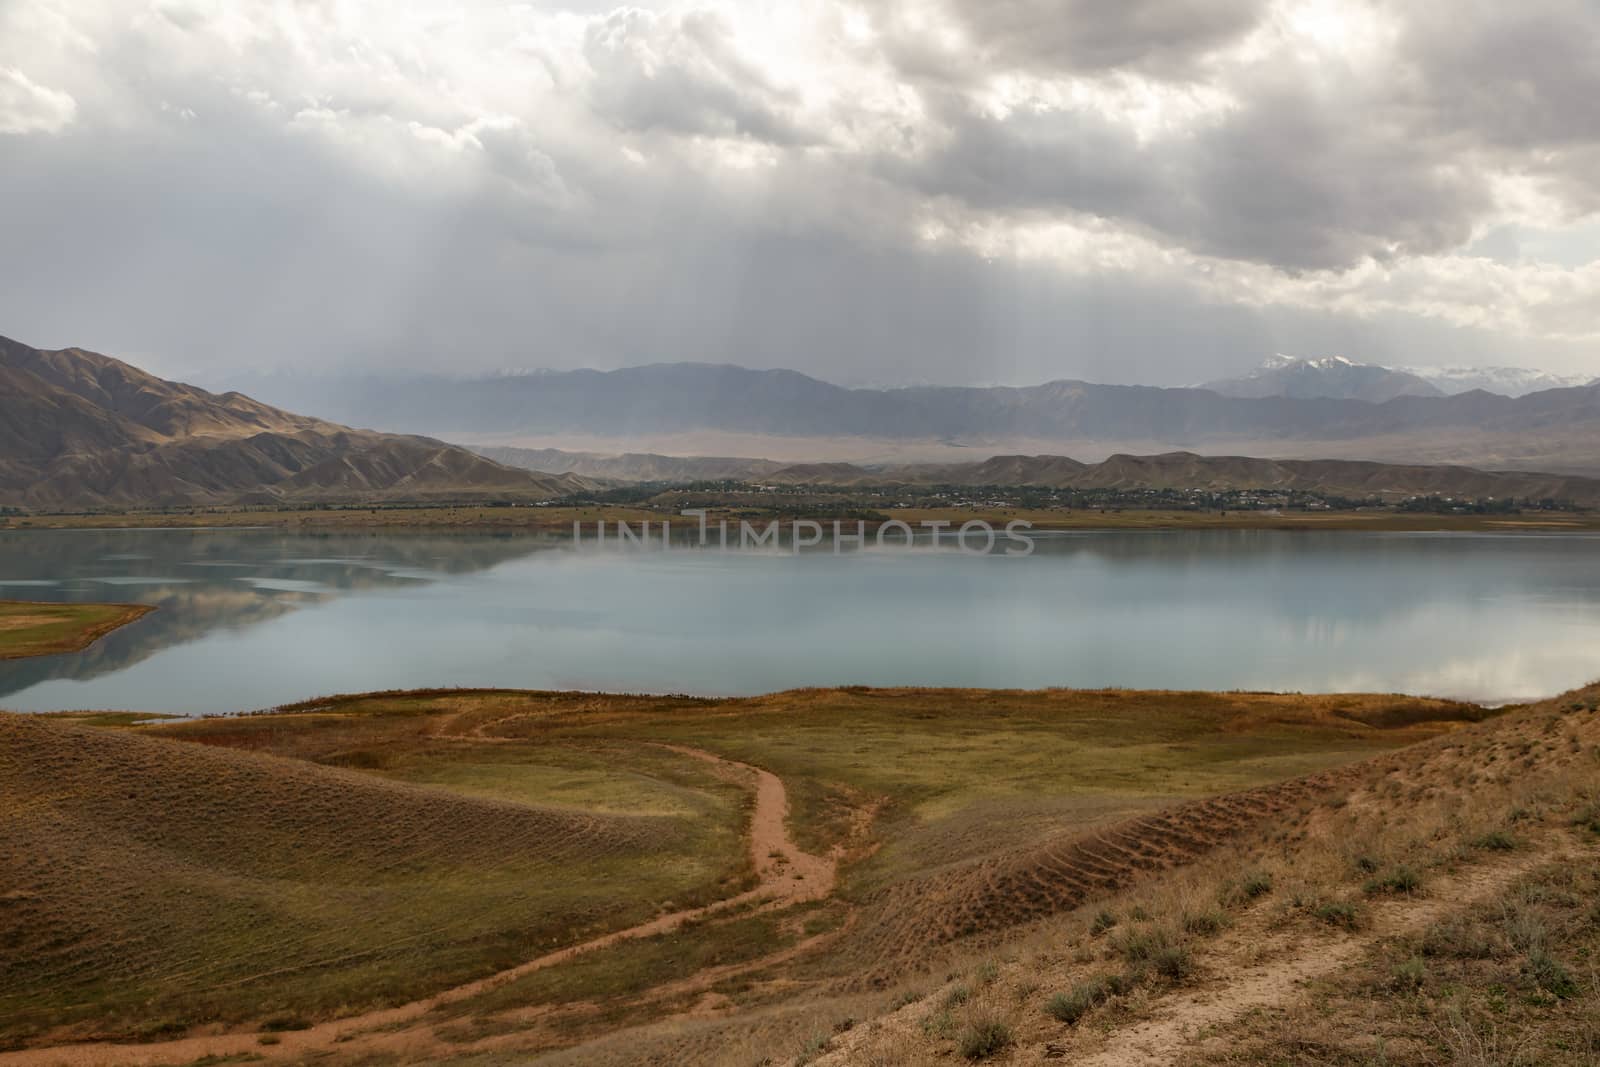 clouds over the Toktogul Reservoir, reservoir in the territory of the Toktogul district of the Jalal-Abad region of Kyrgyzstan.